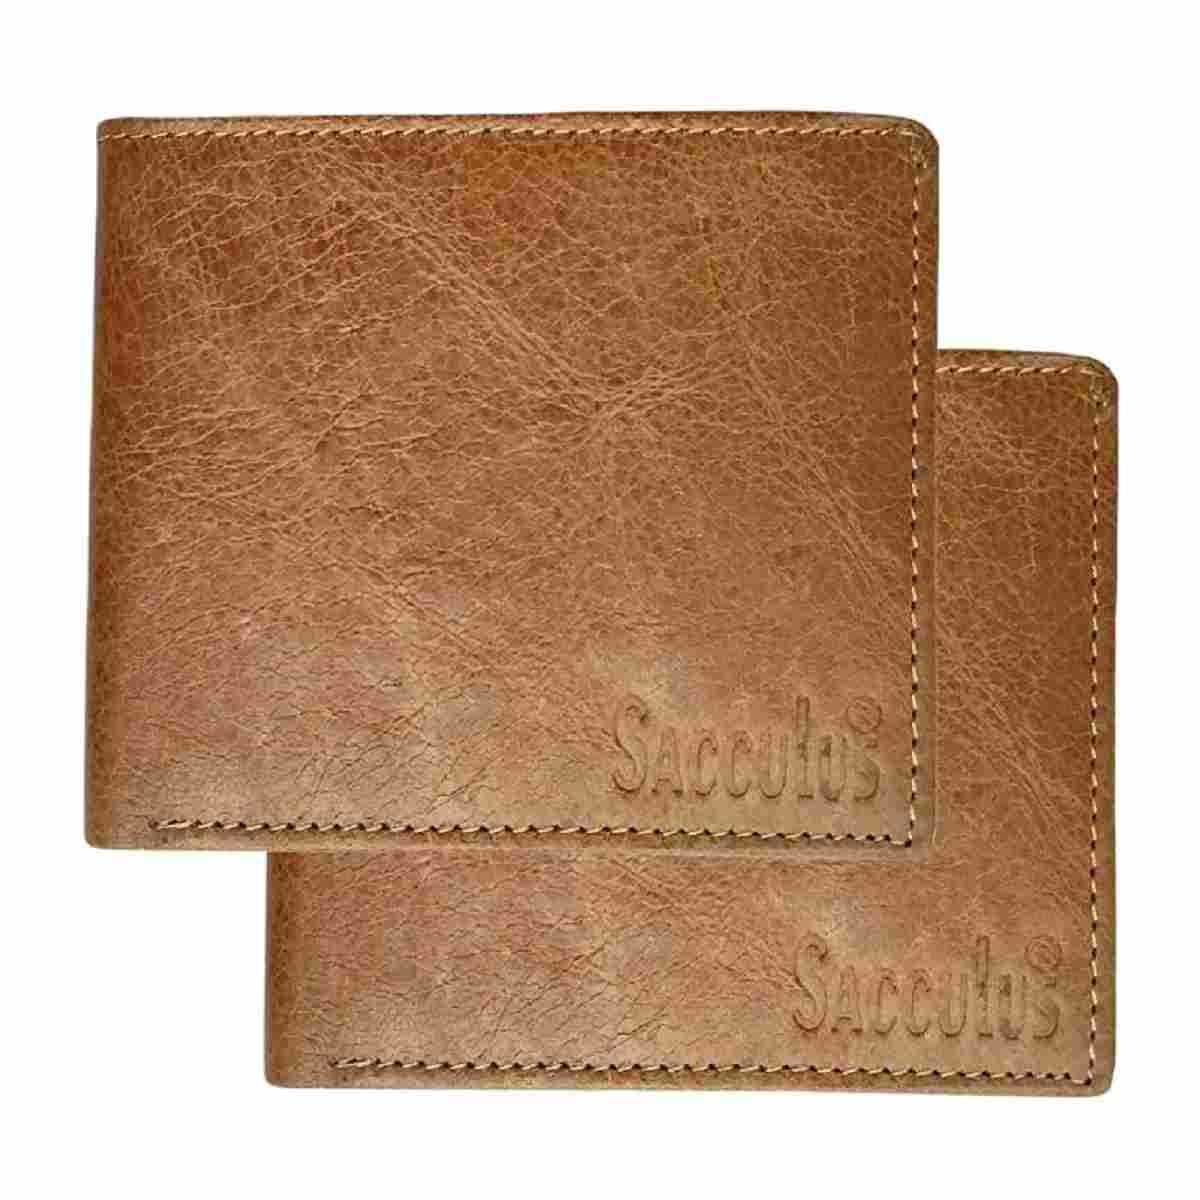 E2003 B Crust Leather Wallets for men pack of 2.